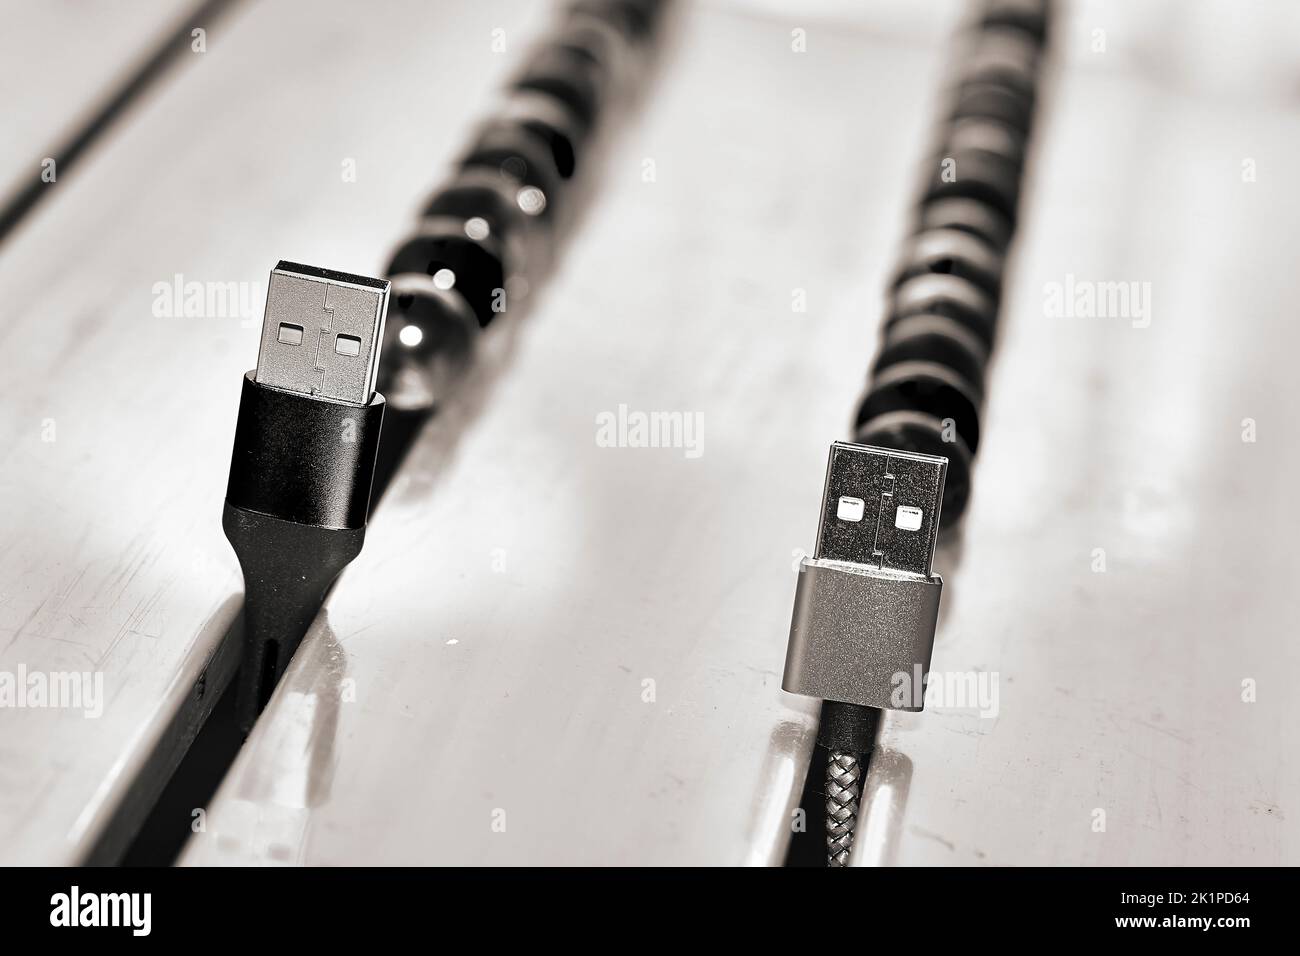 Connect and chat. Black and white usb cables and balloons Stock Photo